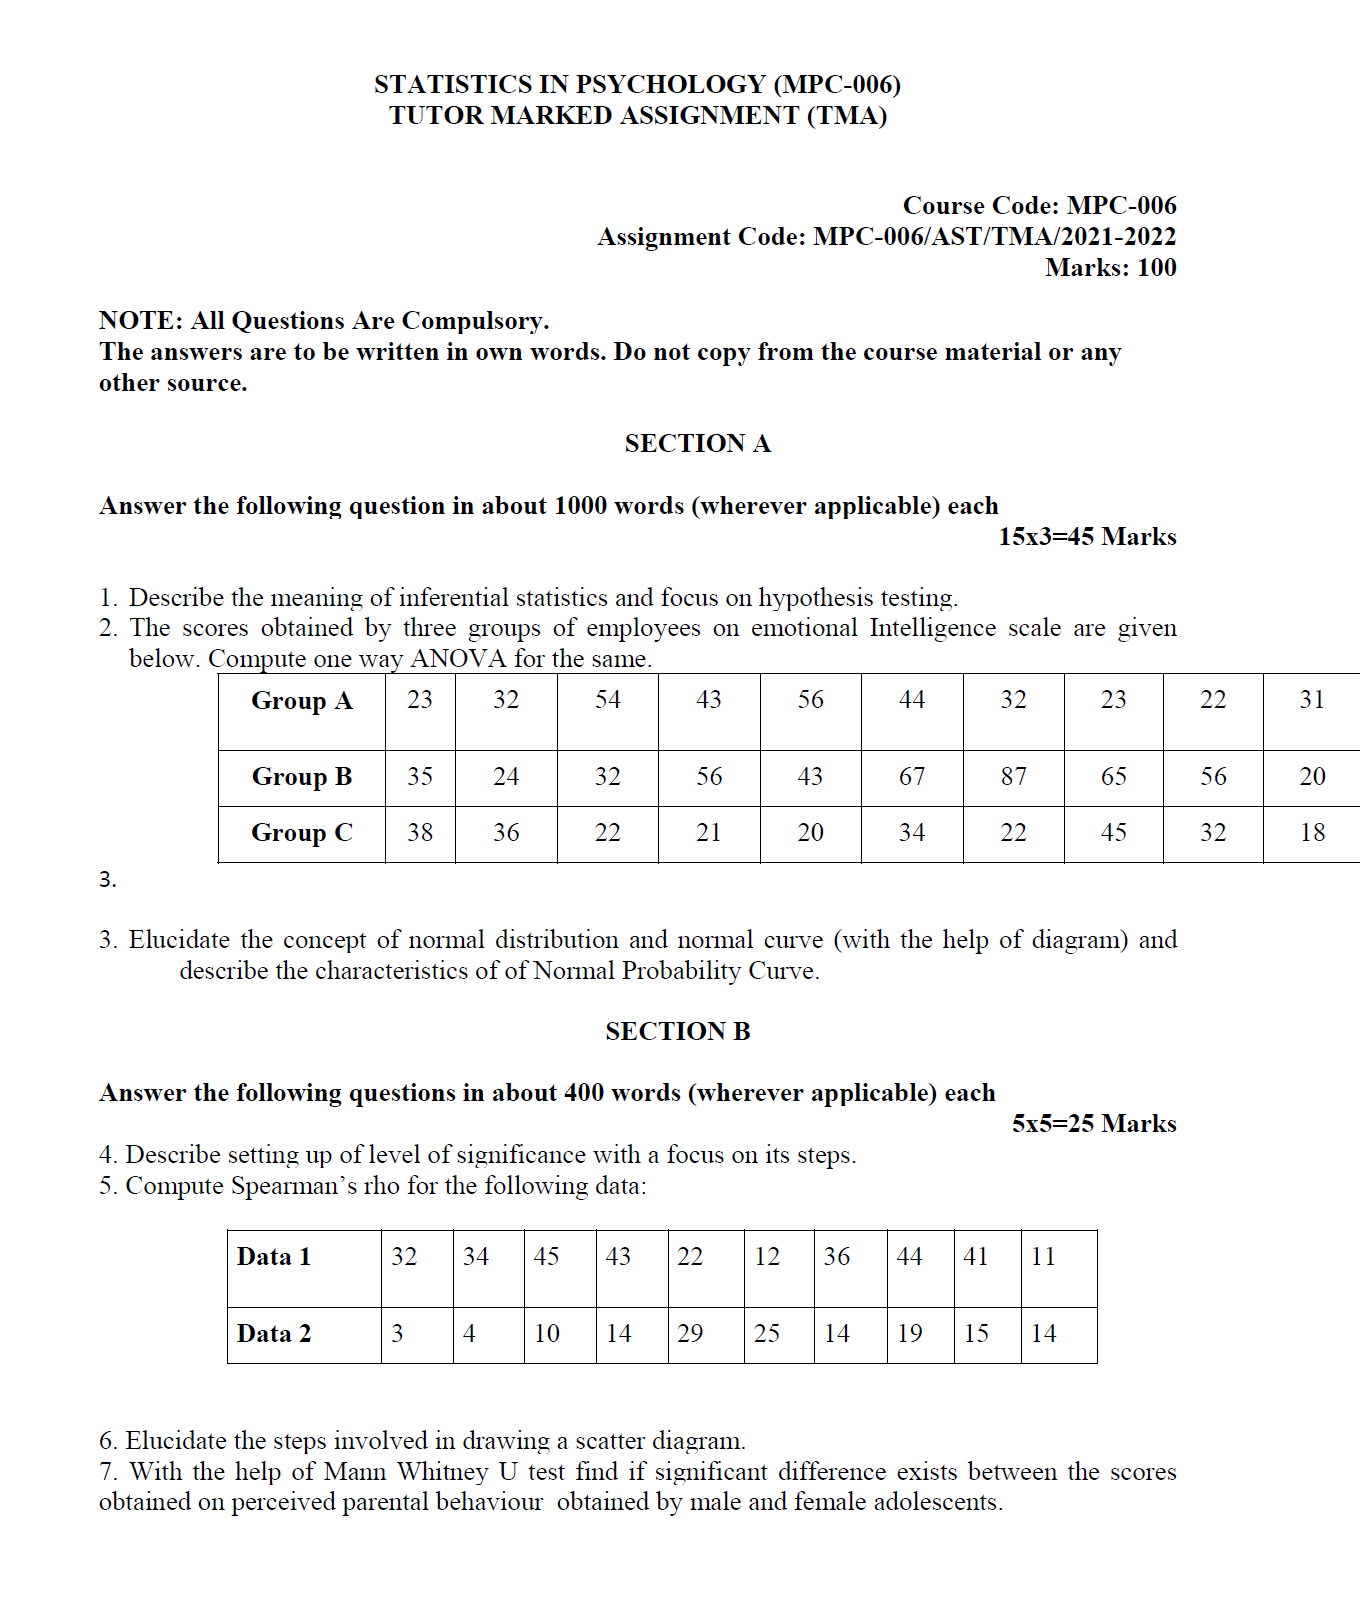 download assignment question paper